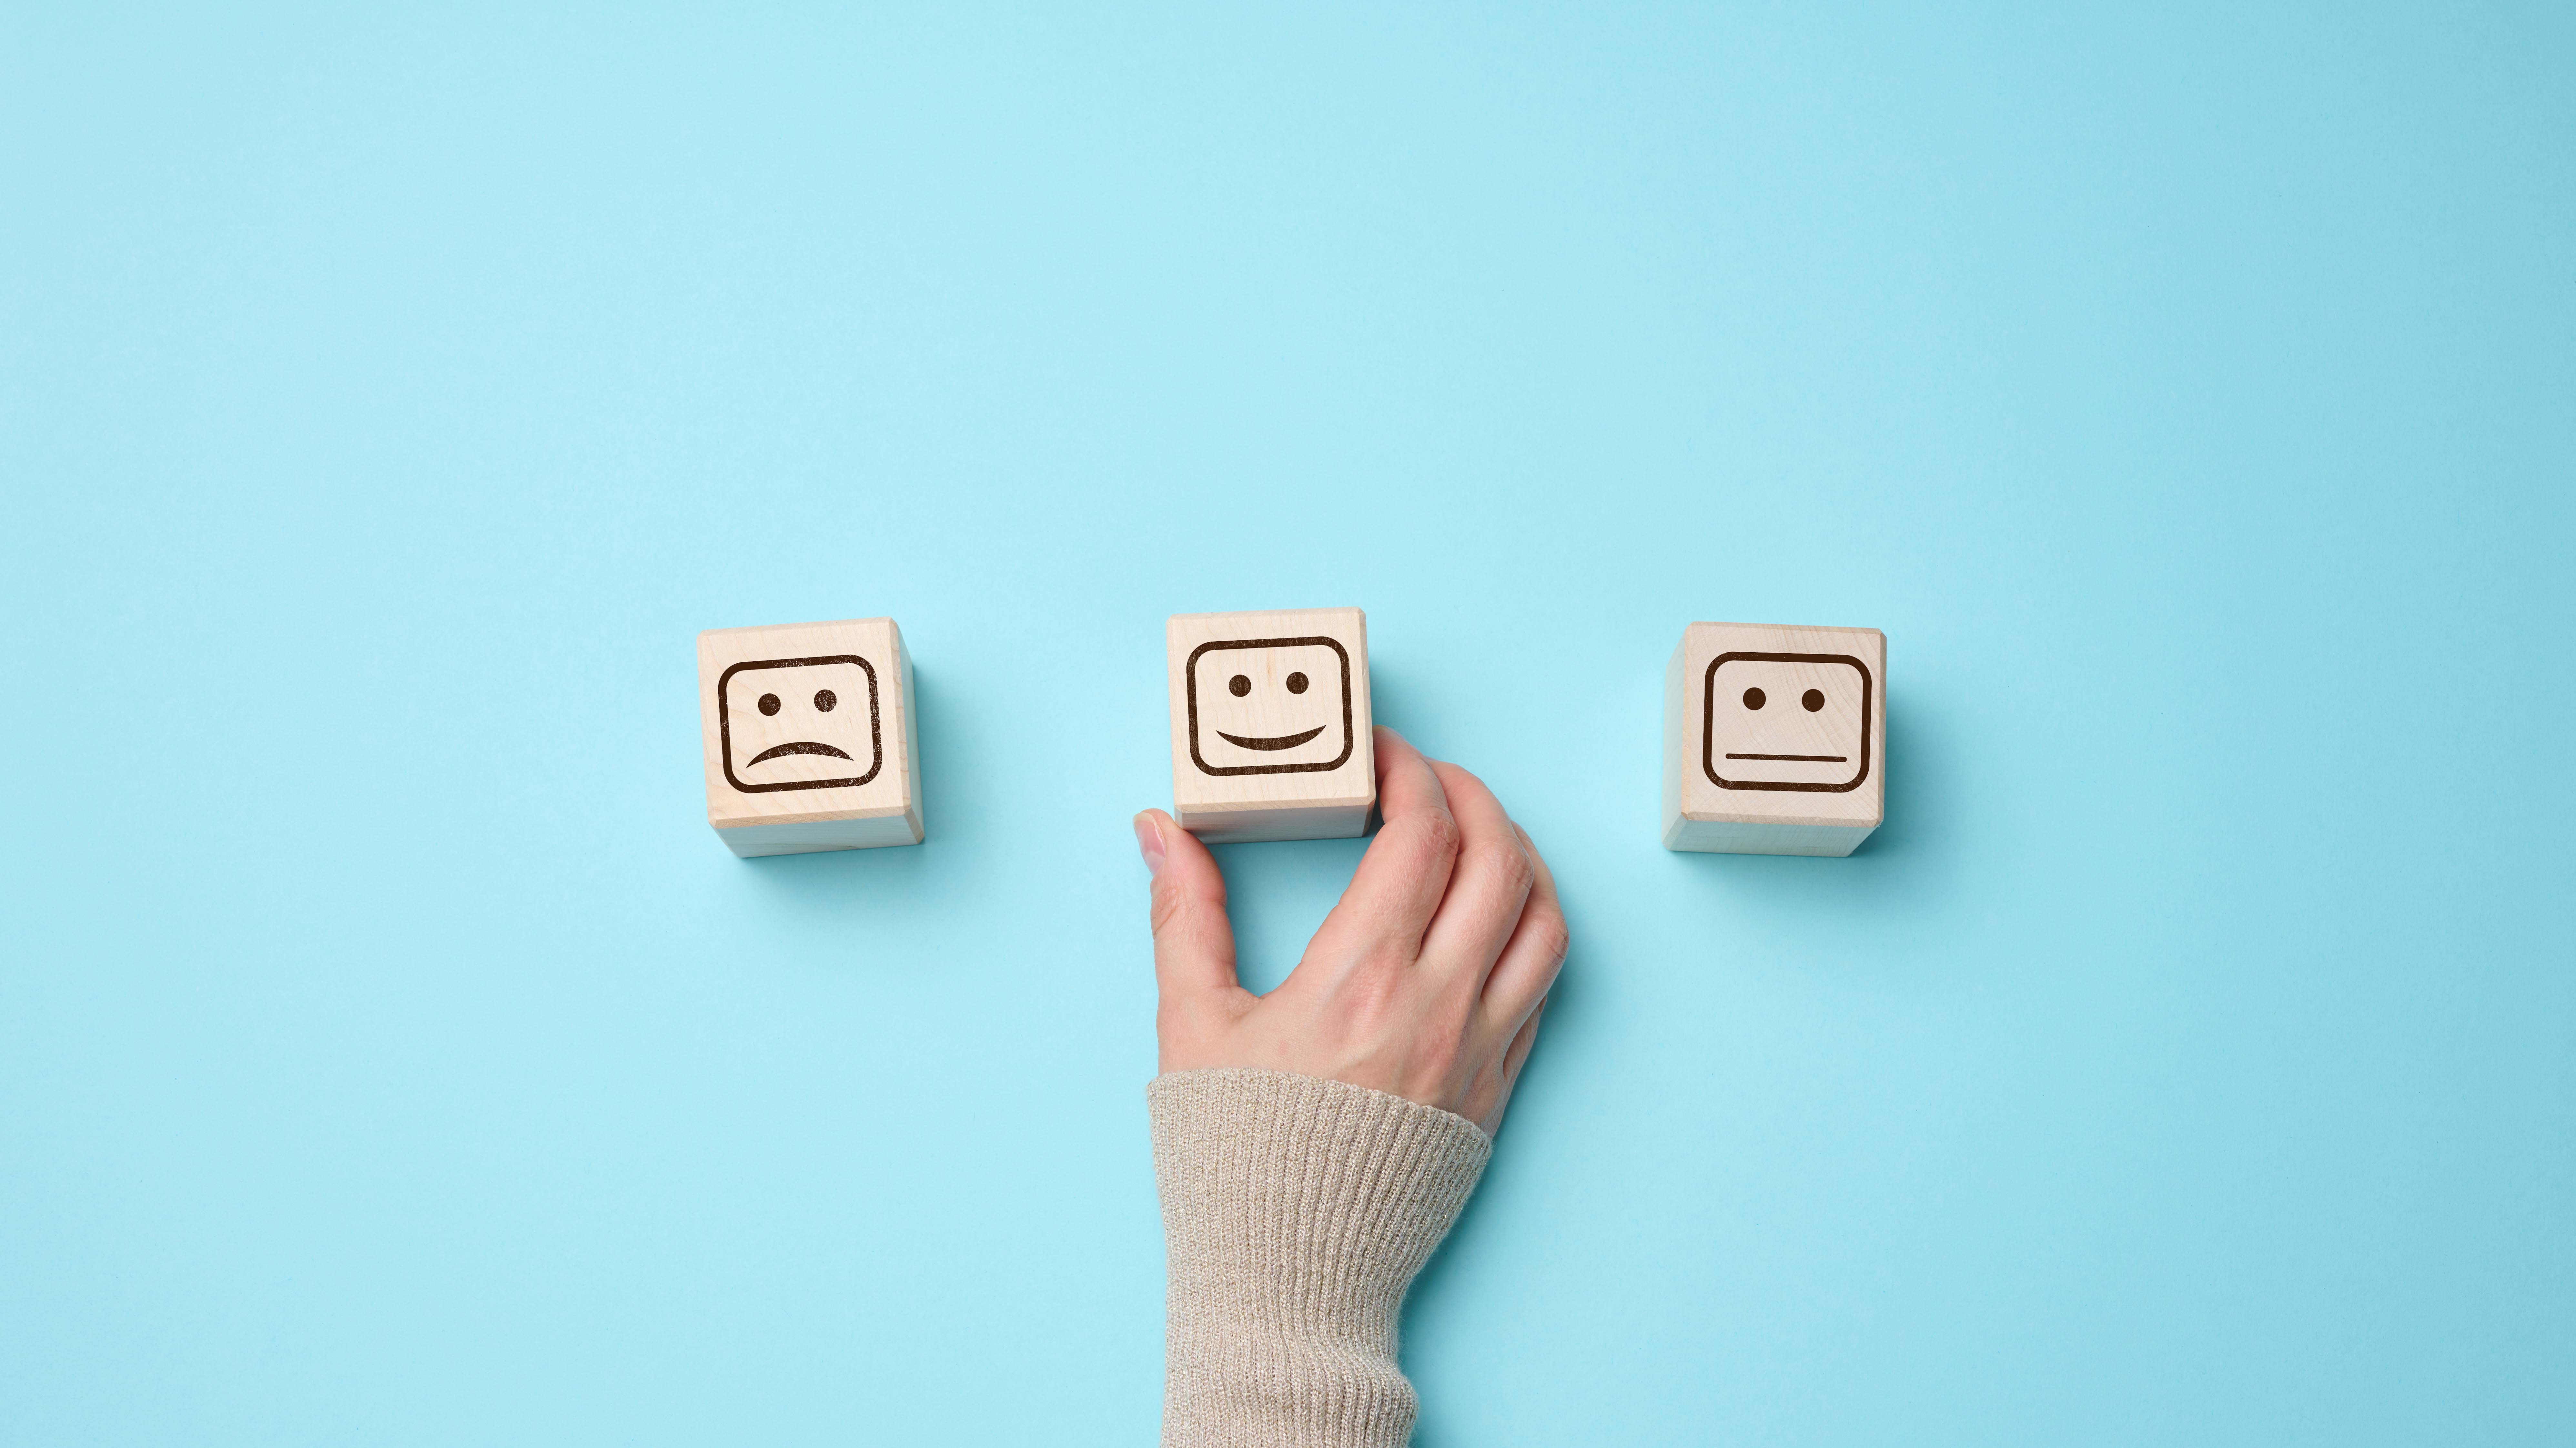 Blocks showing faces expressing different emotions